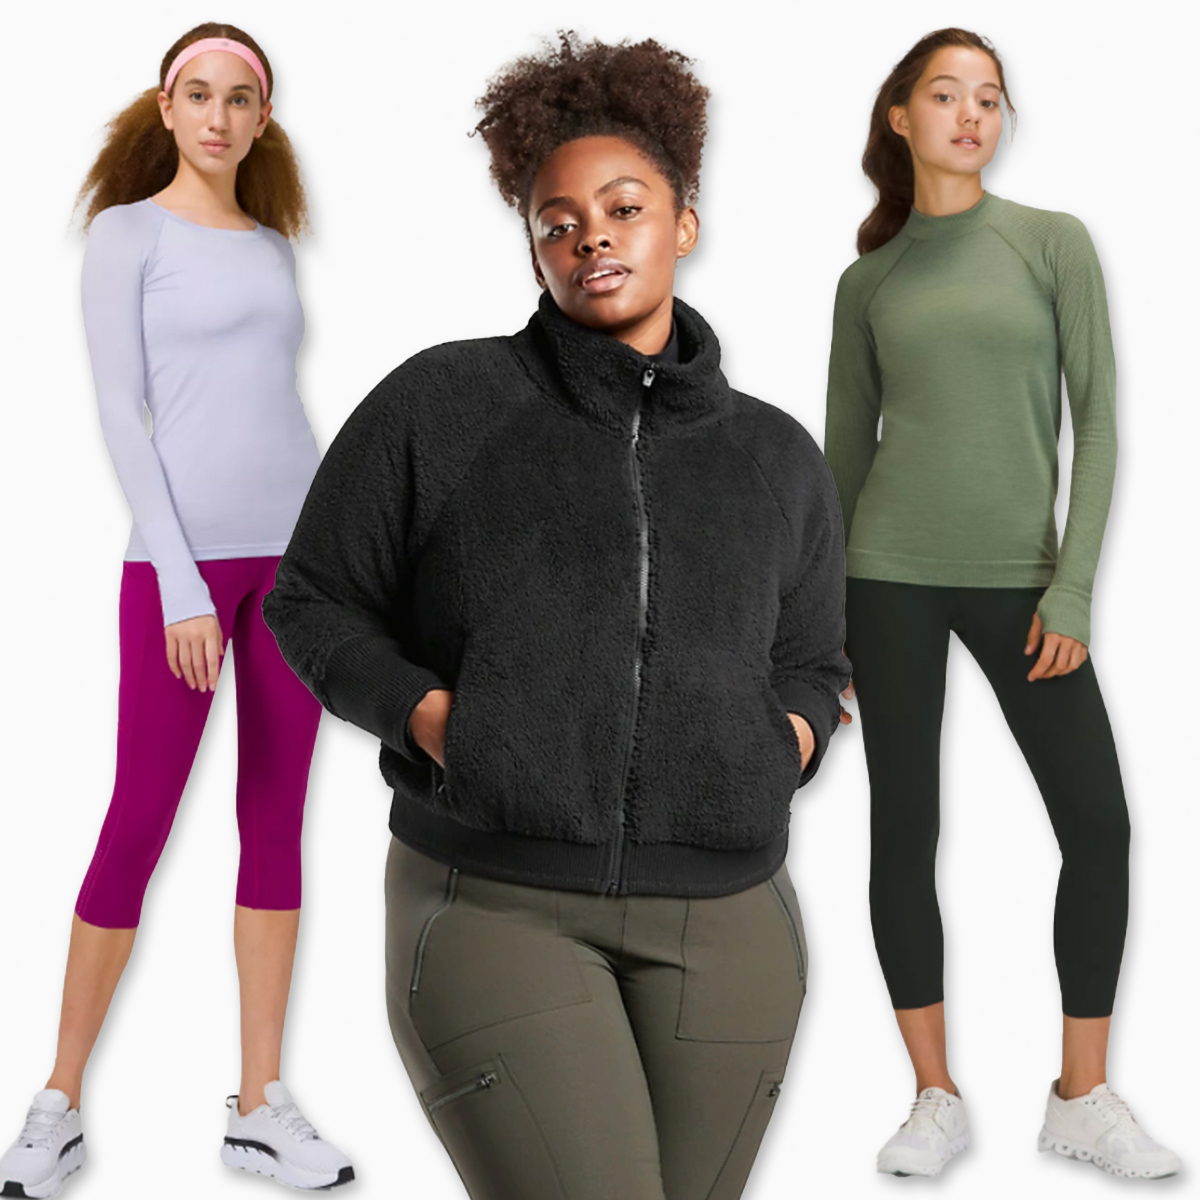 My Winter Workout Gear - What I'm Wearing And Loving Both Indoors